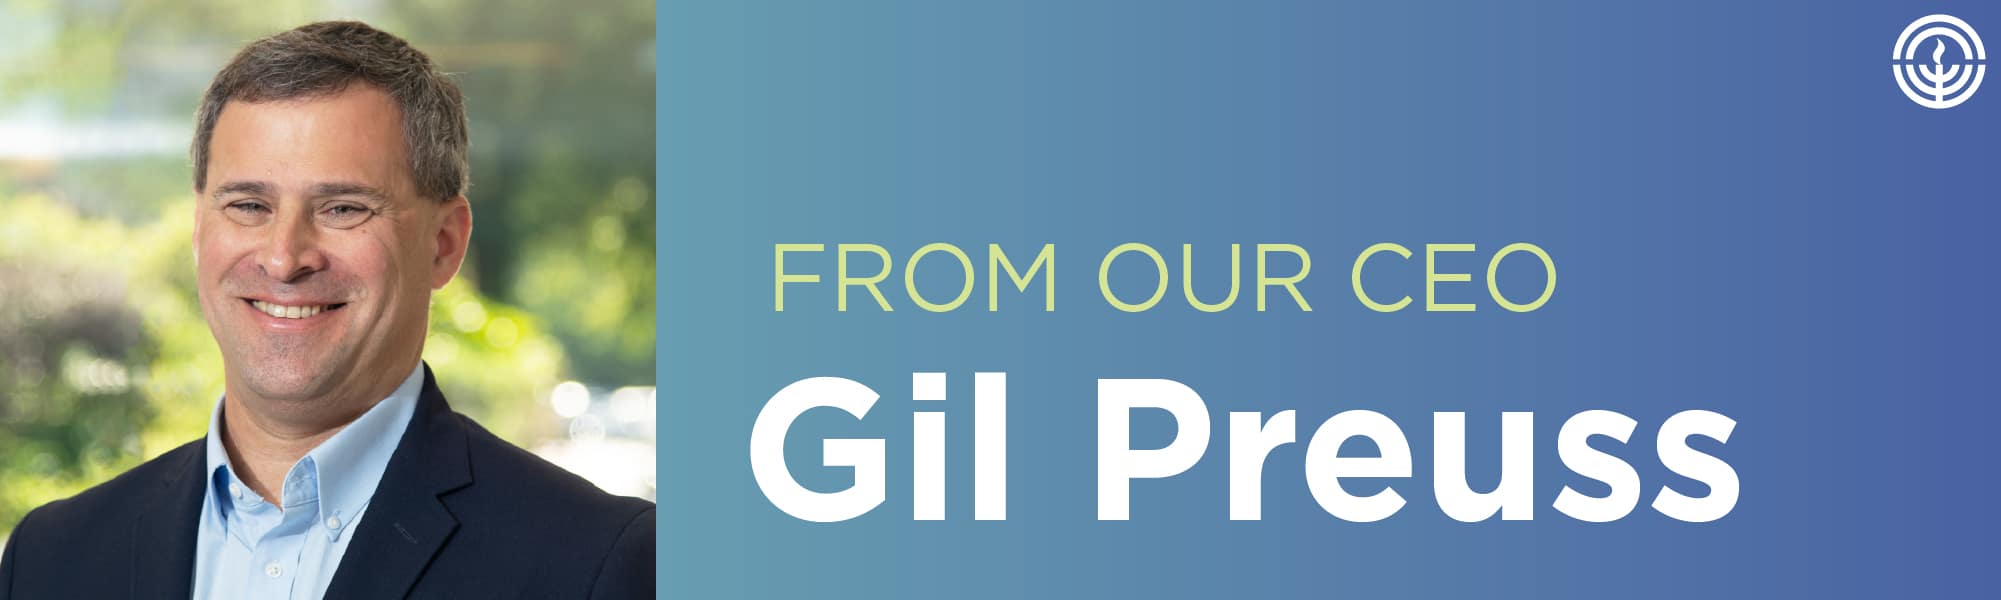 Weekly Reflection – December 20, 2019: A Message from Gil Preuss